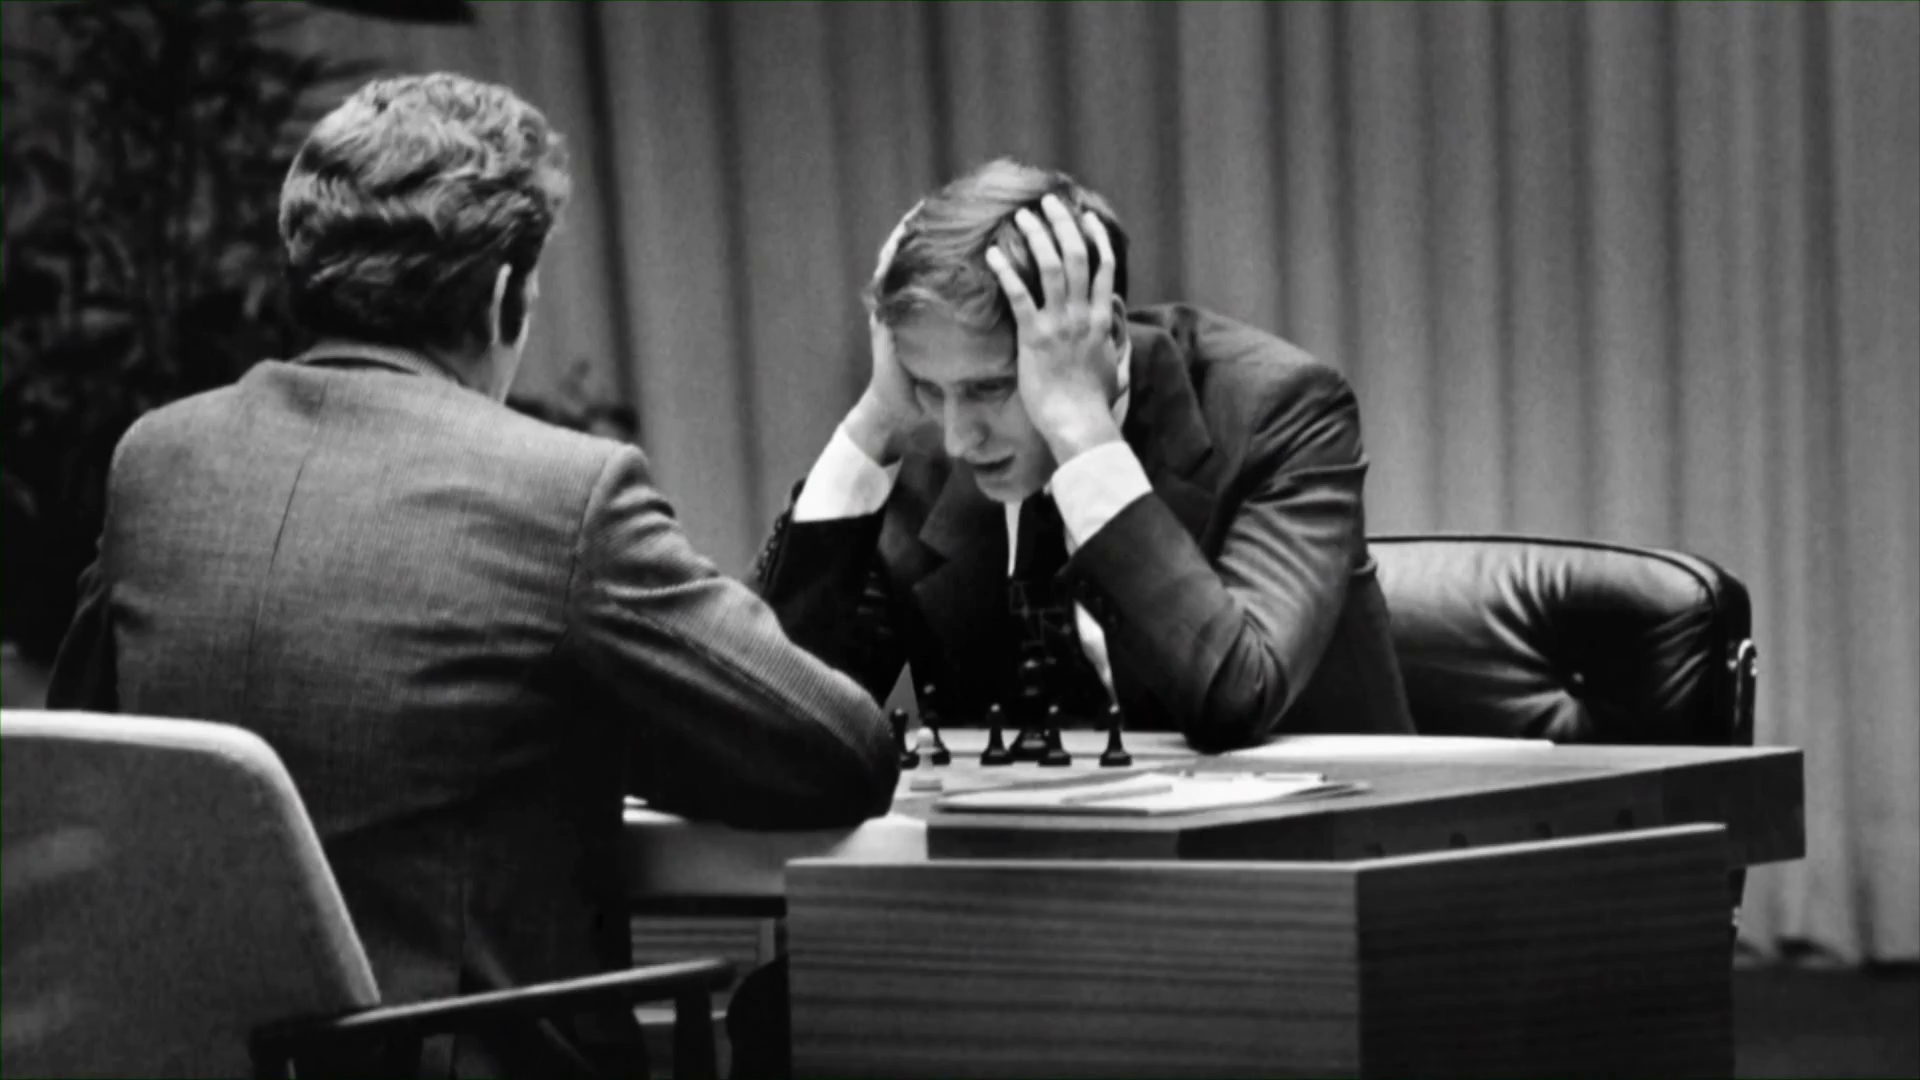 The mystery of the death of chess genius